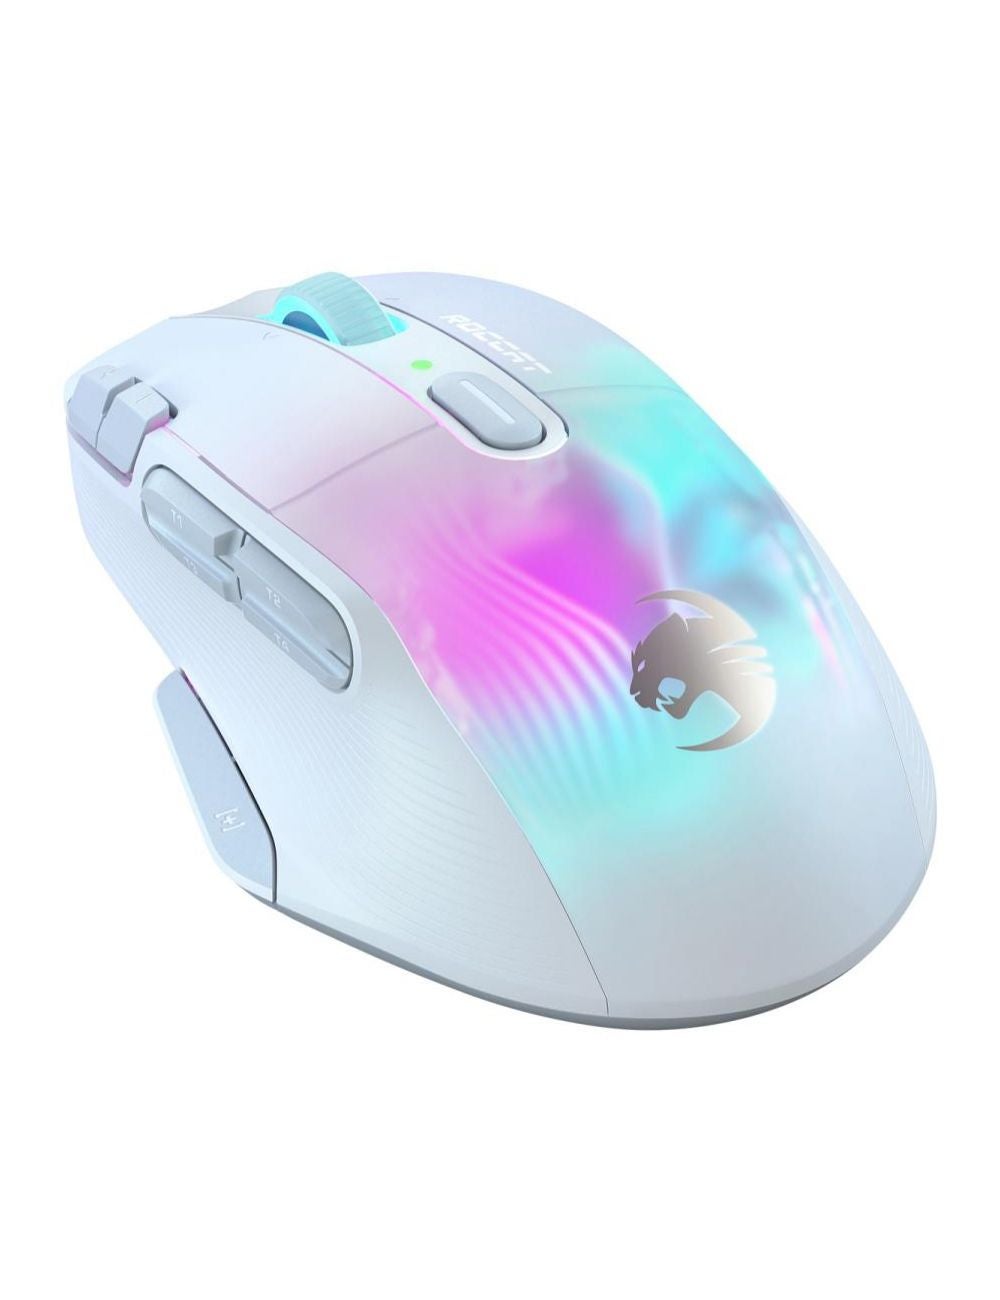 ROCCAT'S New Kone XP Air Wireless Customizable RGB Gaming Mouse Is Now  Available Worldwide